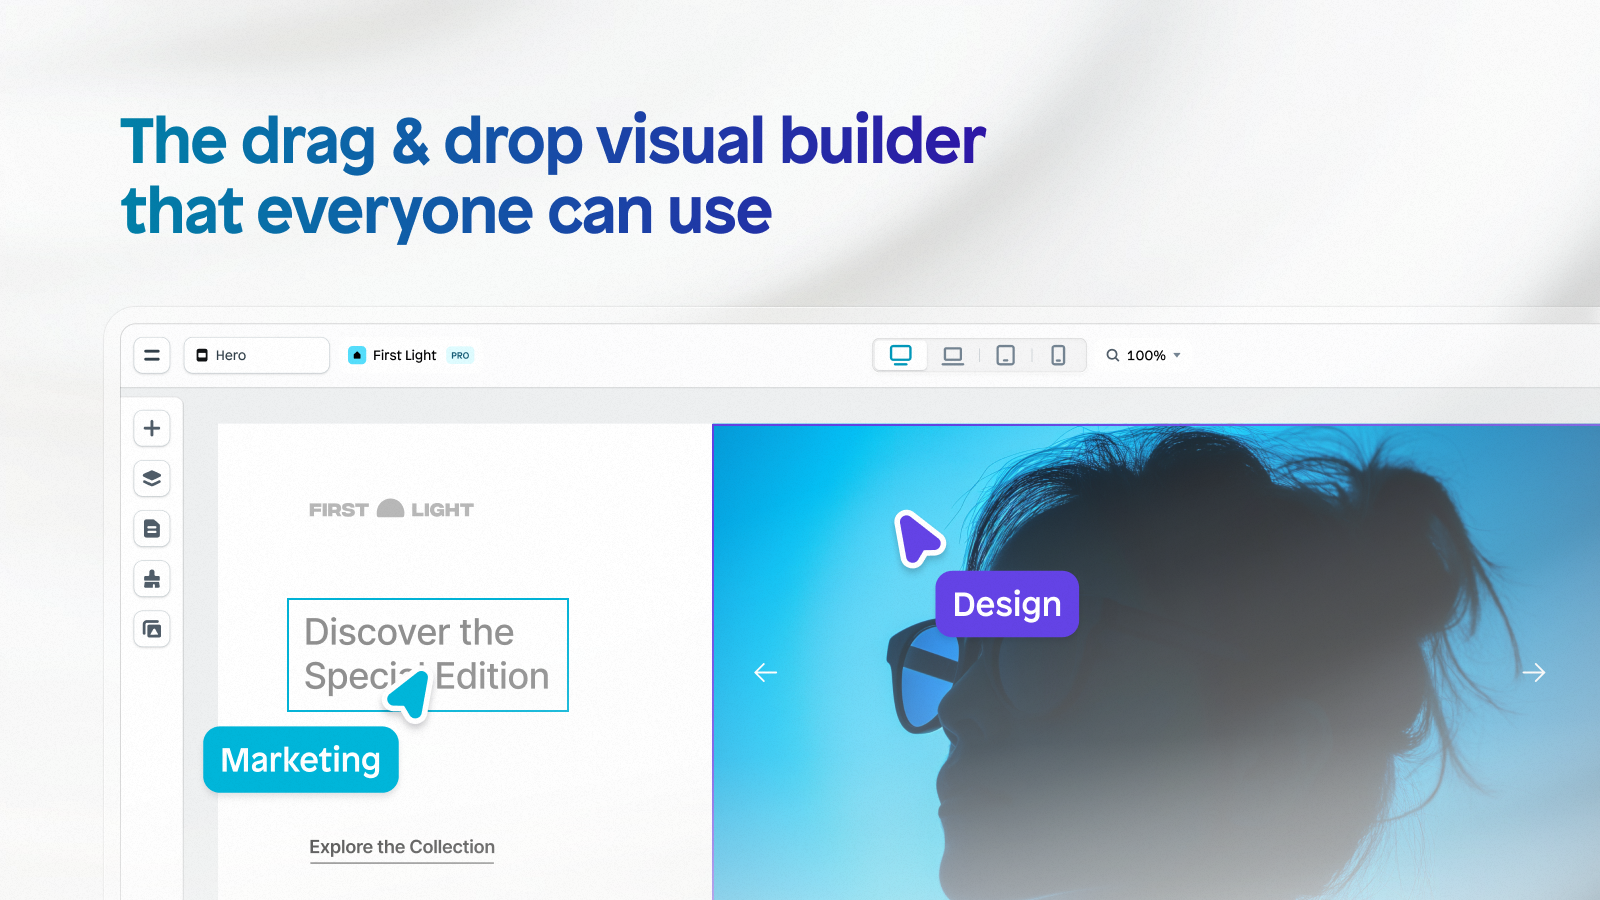 The drag & drop visual builder that everyone can use